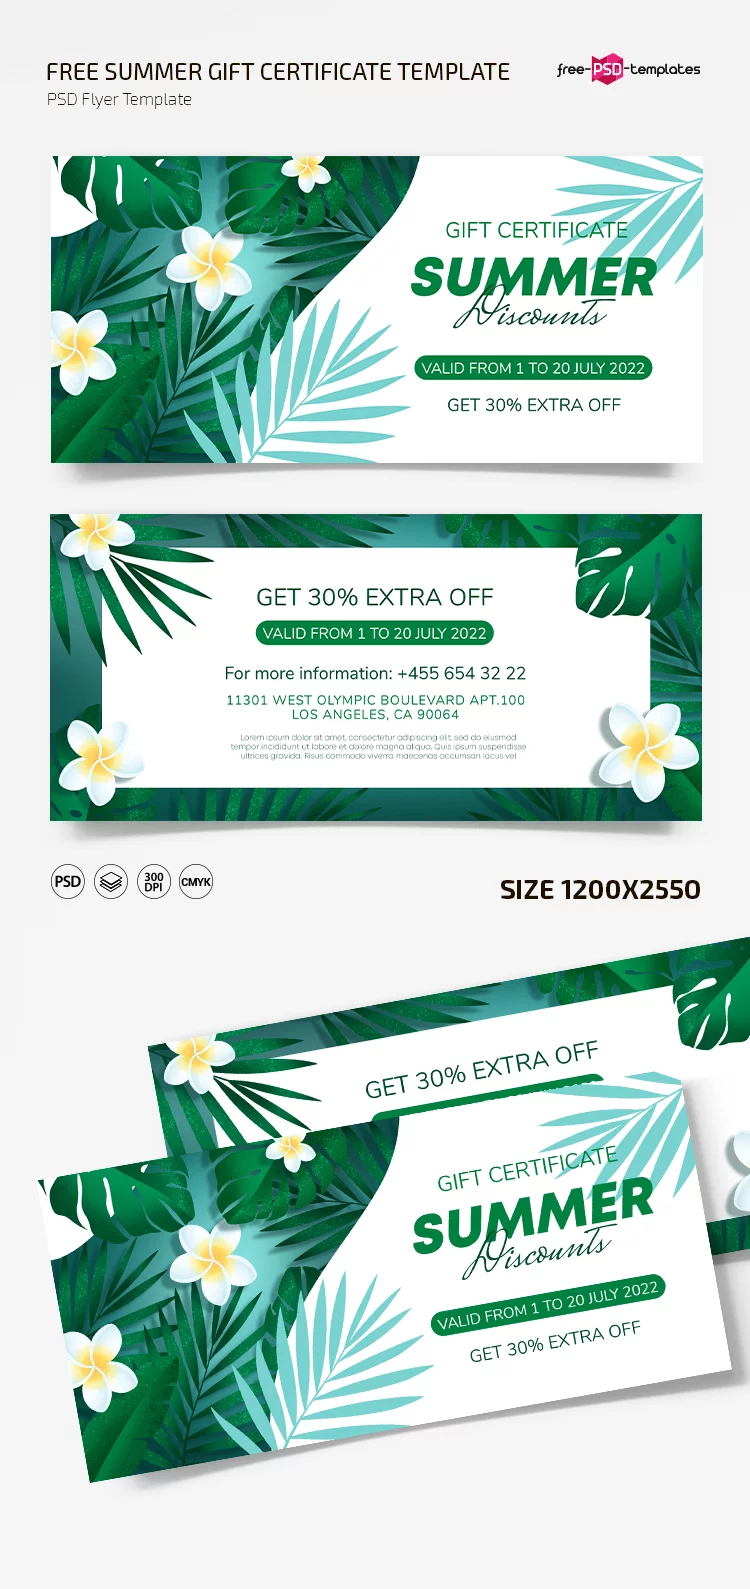 Free Summer Gift Certificate Template